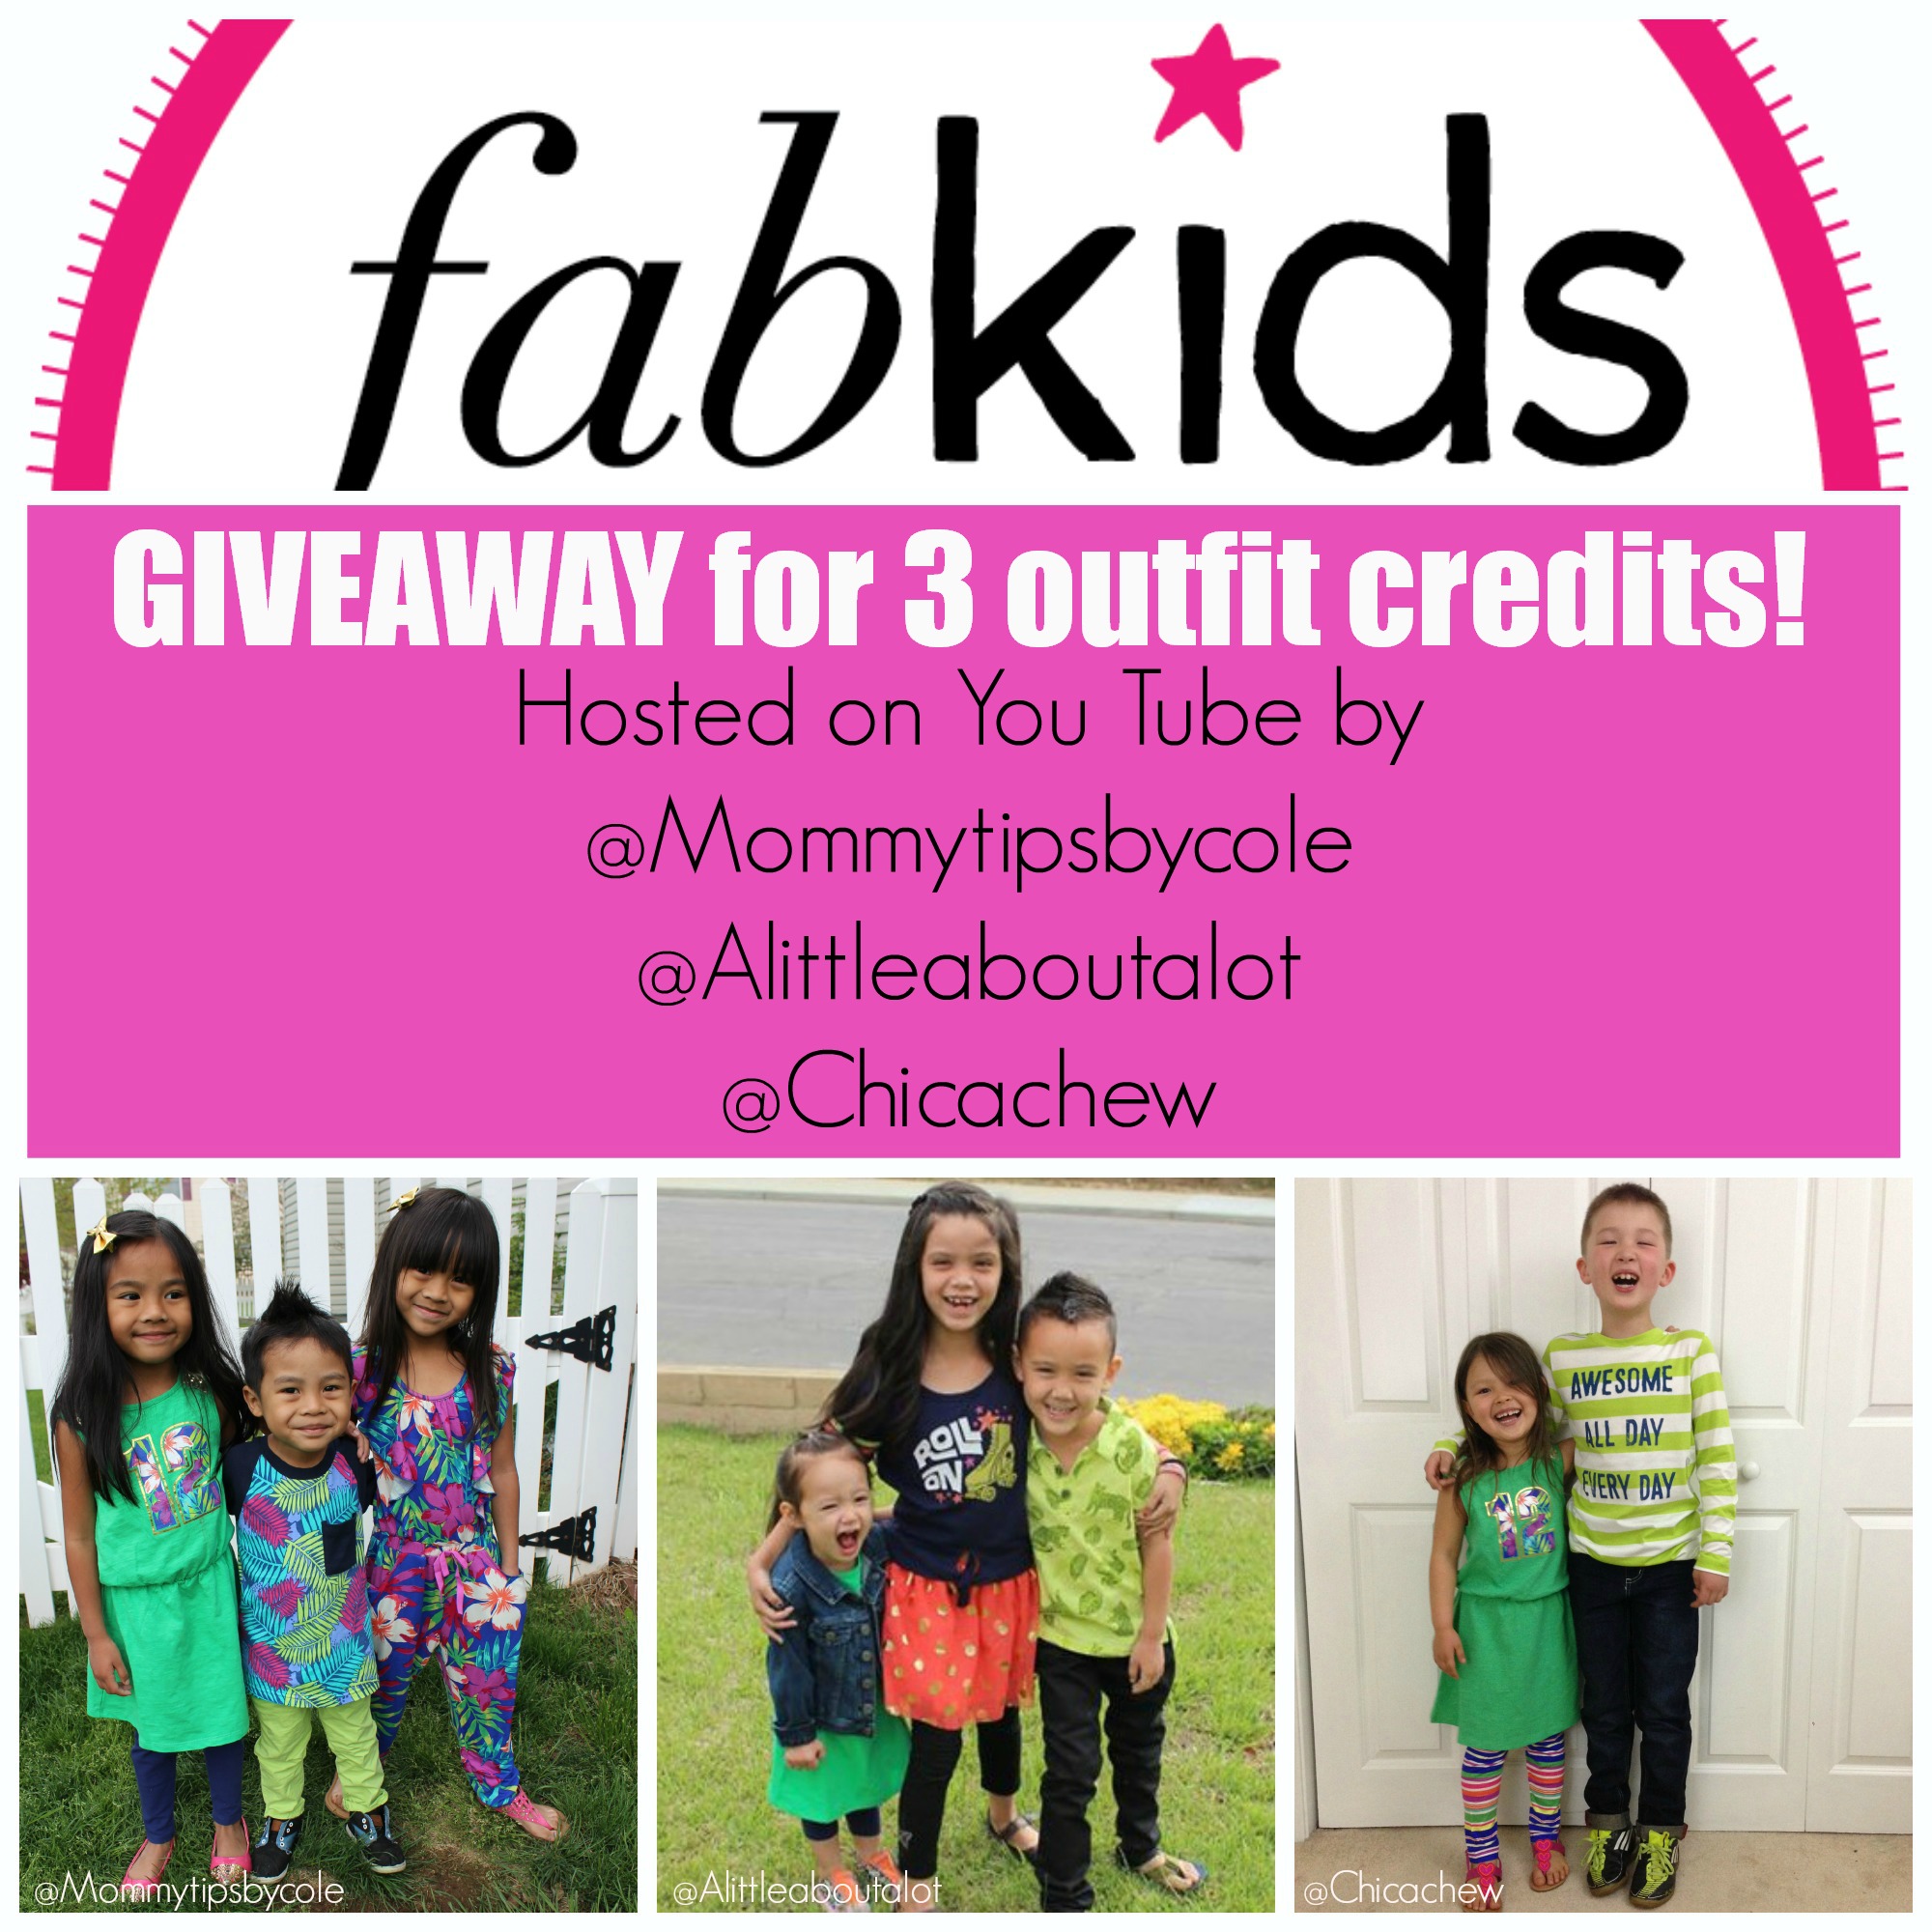 365. fabkids giveaway square2